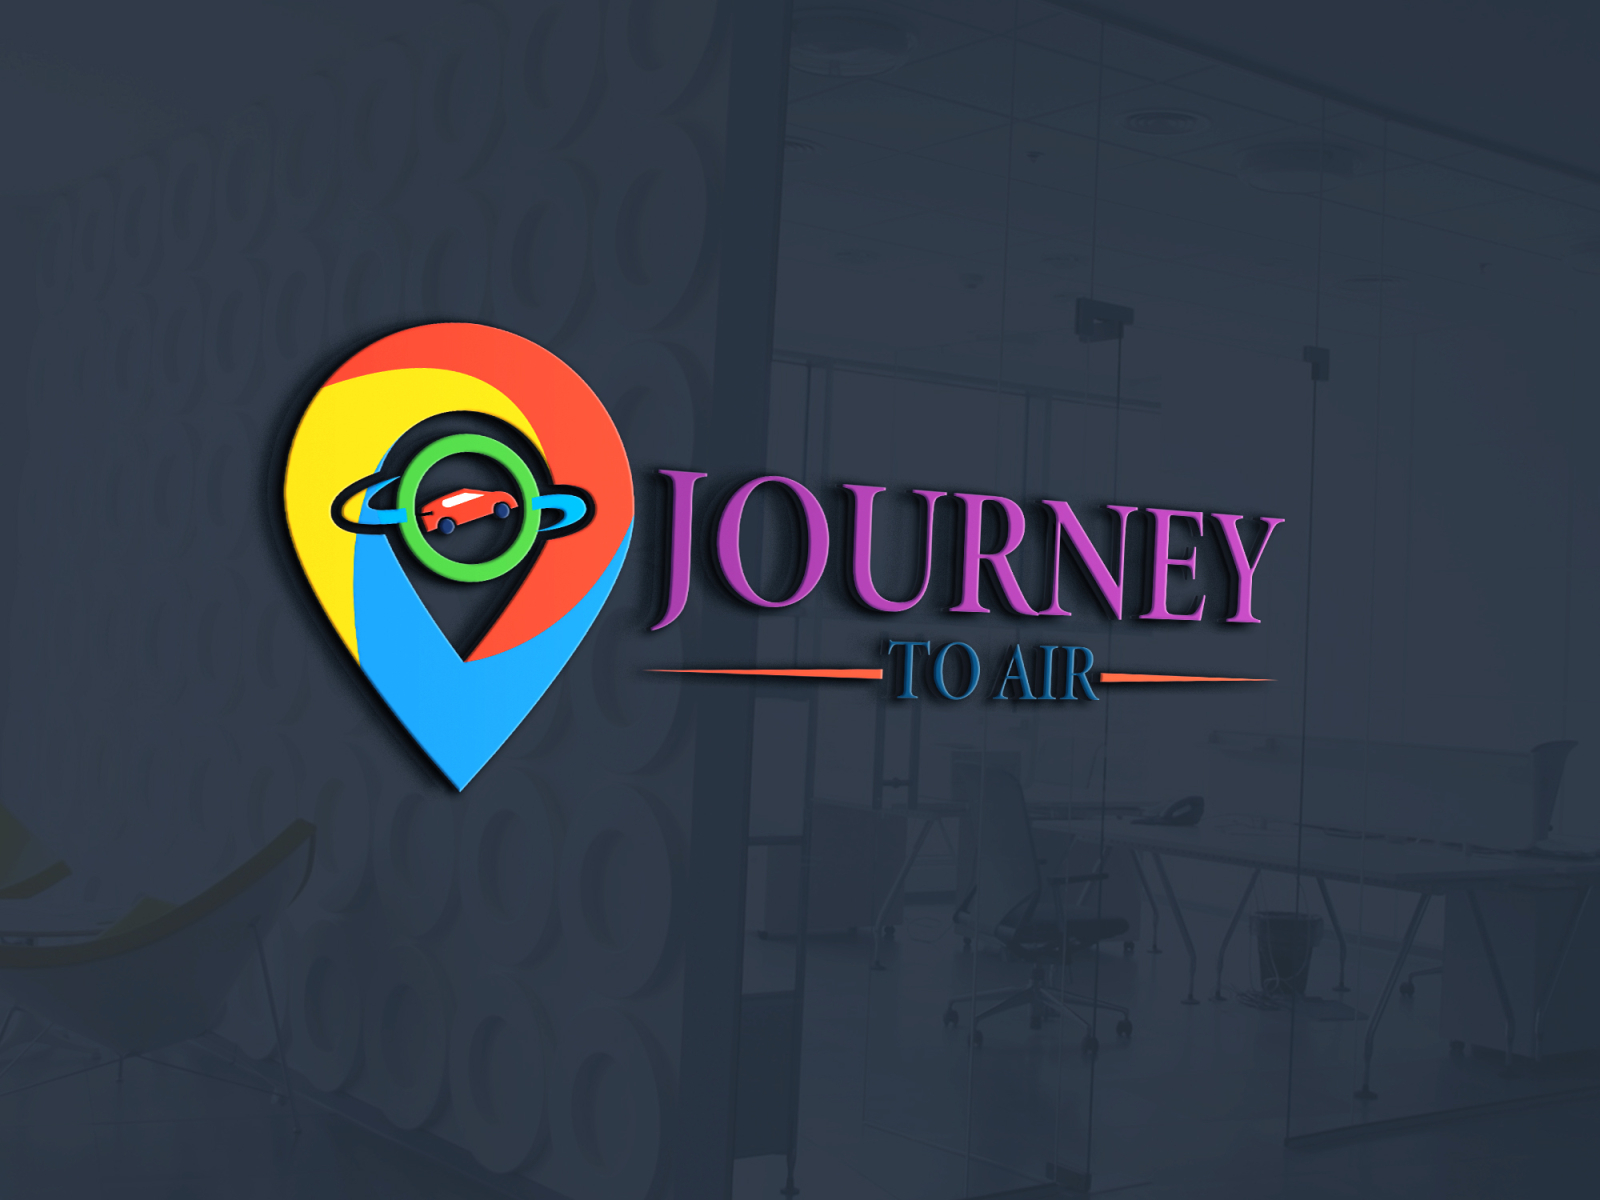 Logo Design by Anamul Hoque on Dribbble